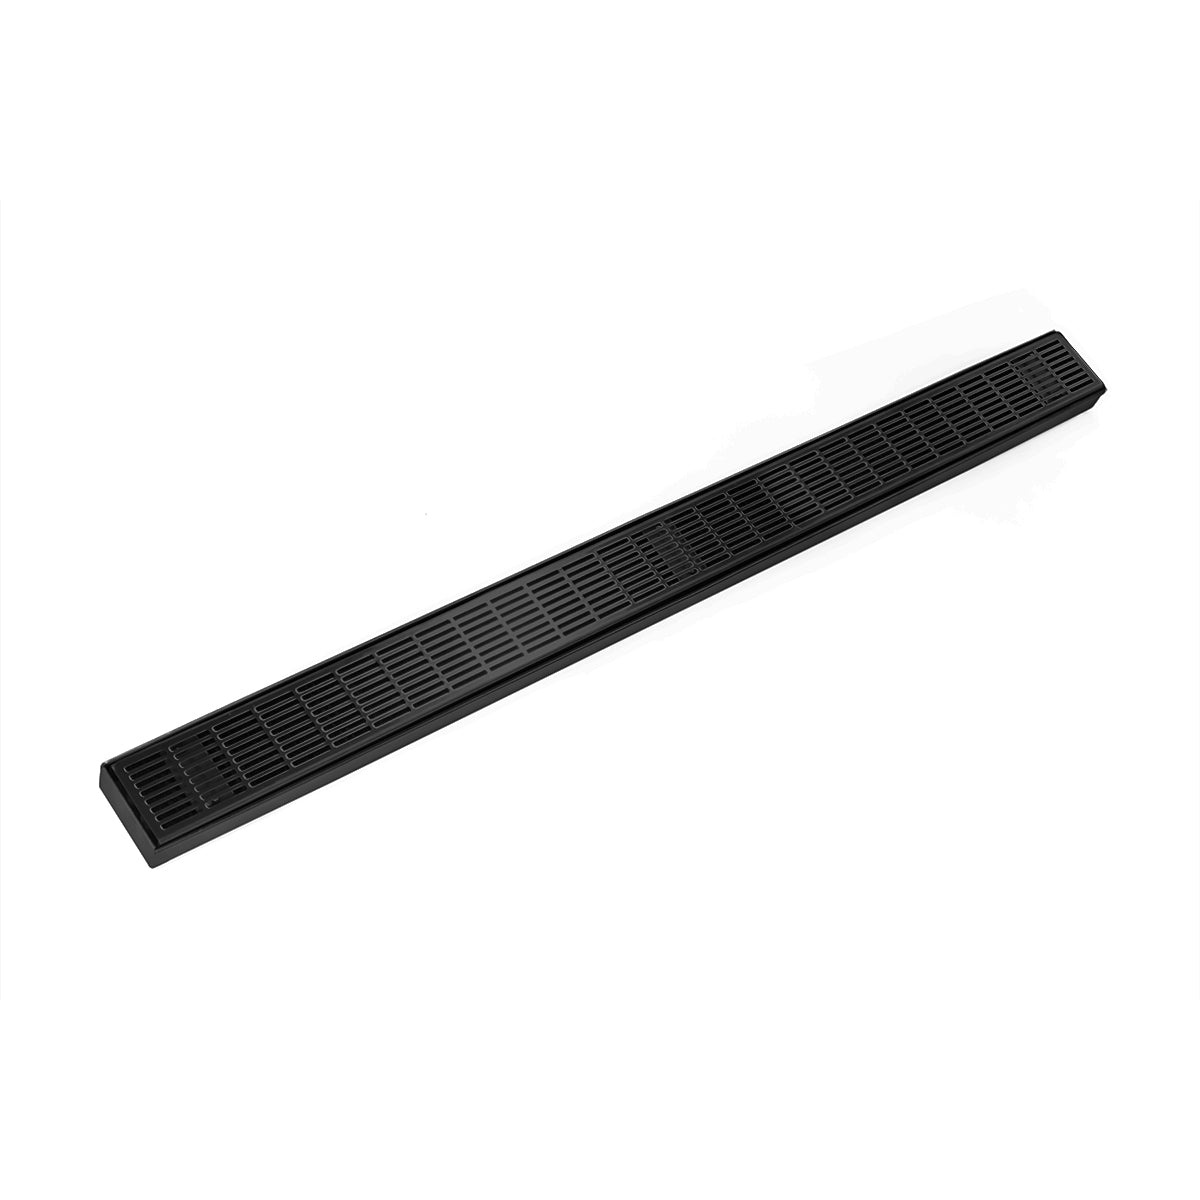 Infinity Drain 42" FX Series Fixed Length Linear Drain Kit with Perforated Slotted Grate